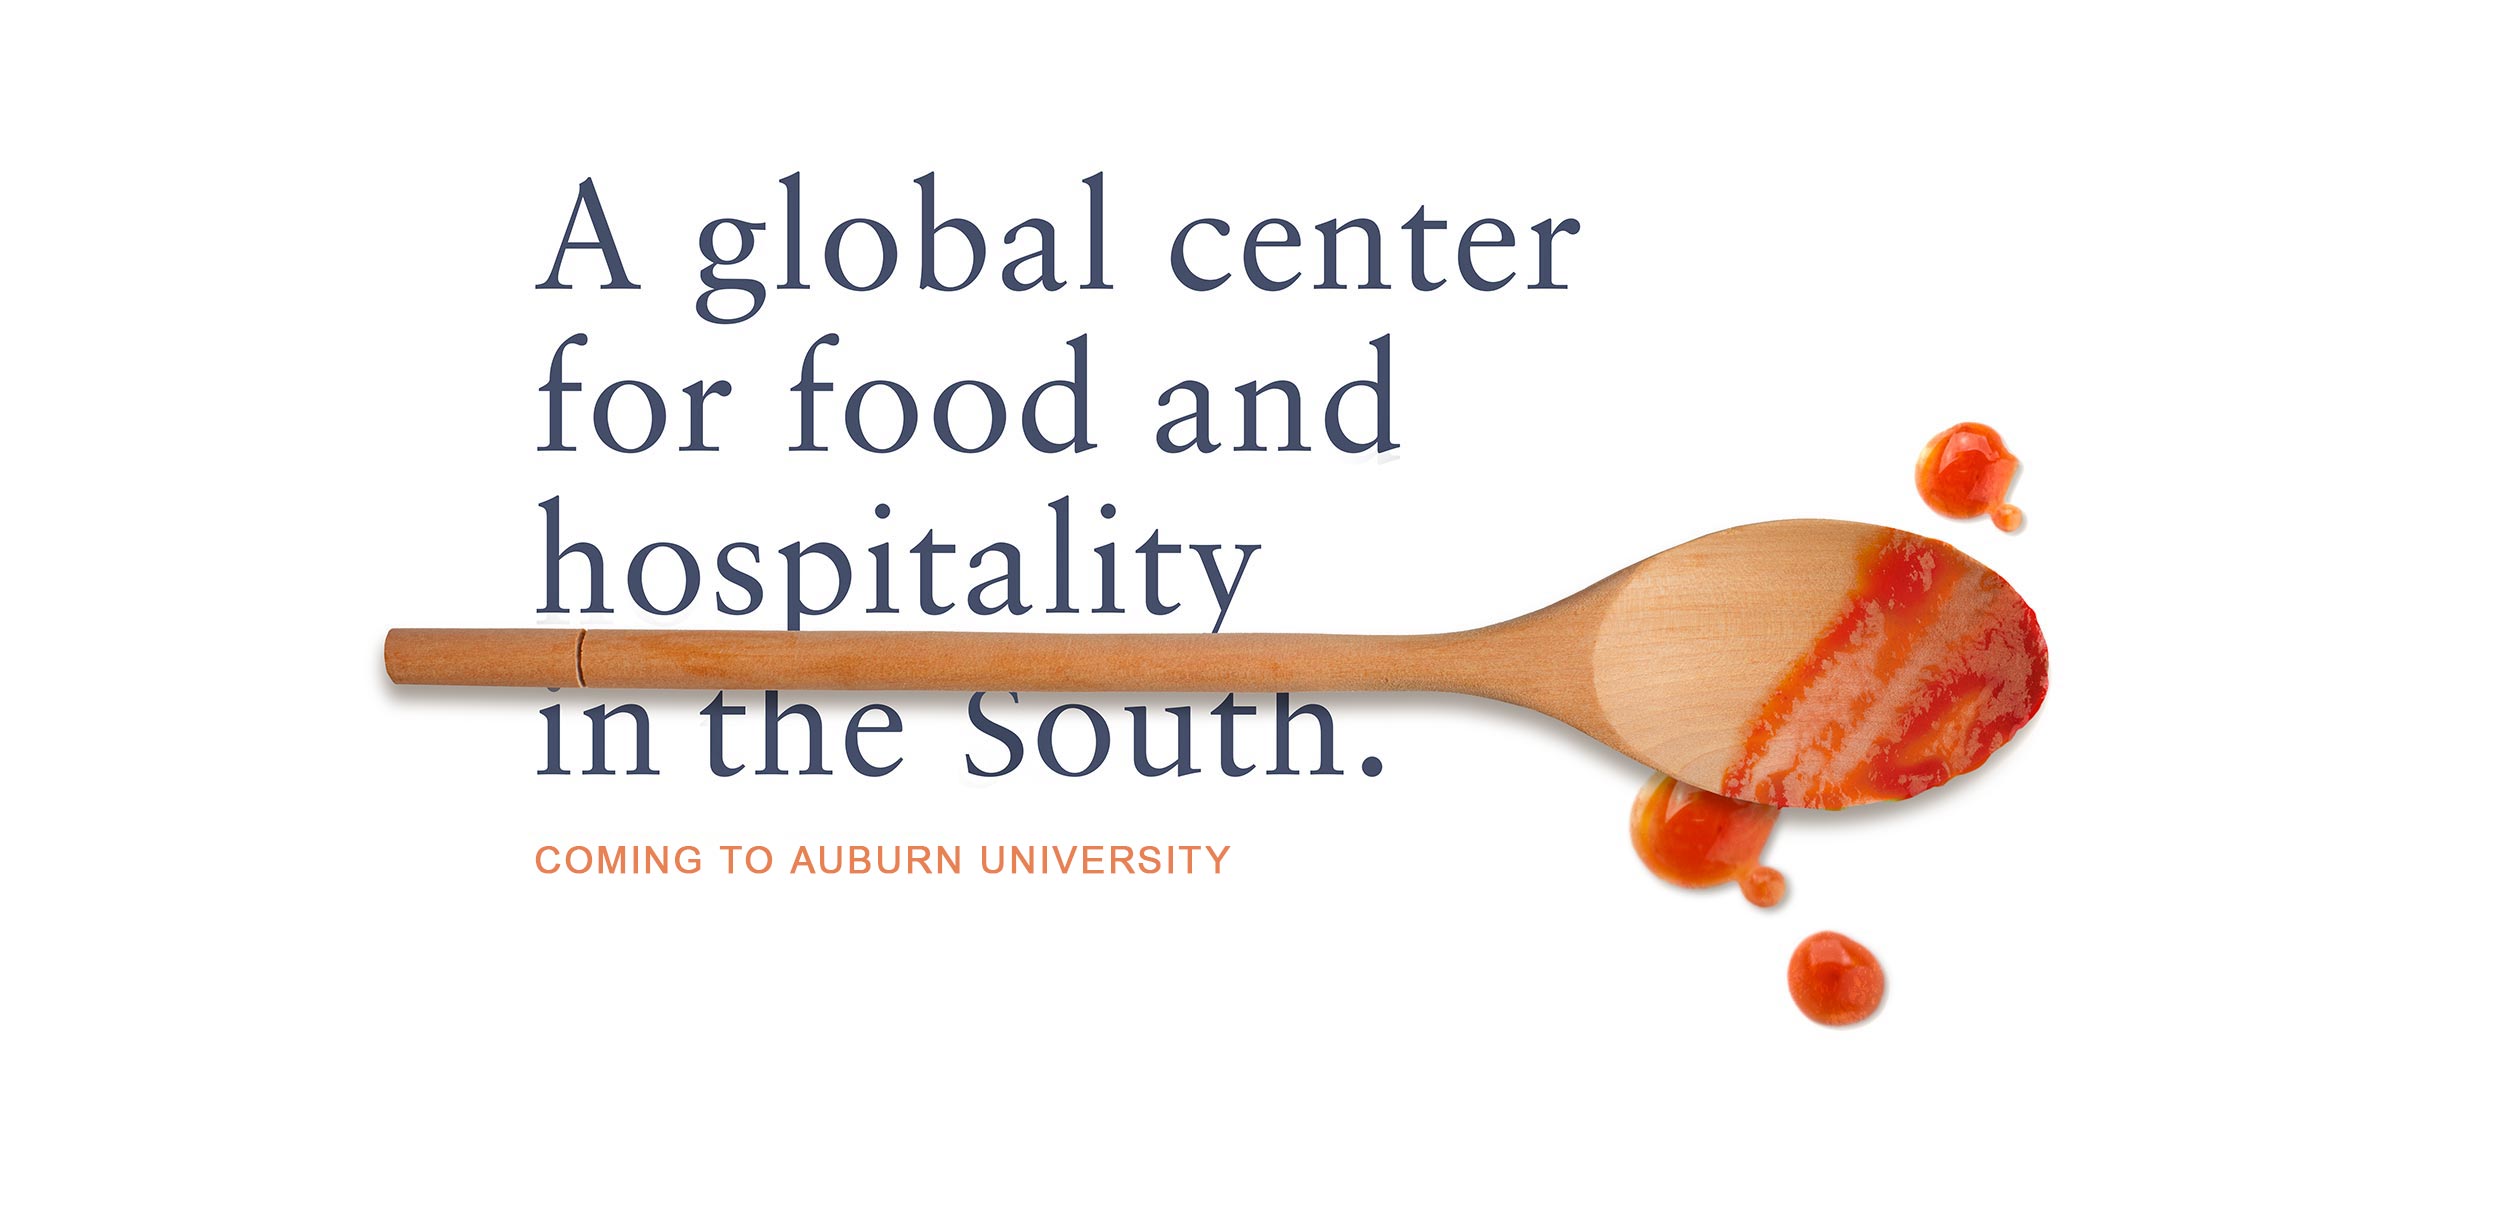 A global center for food and hospitality.